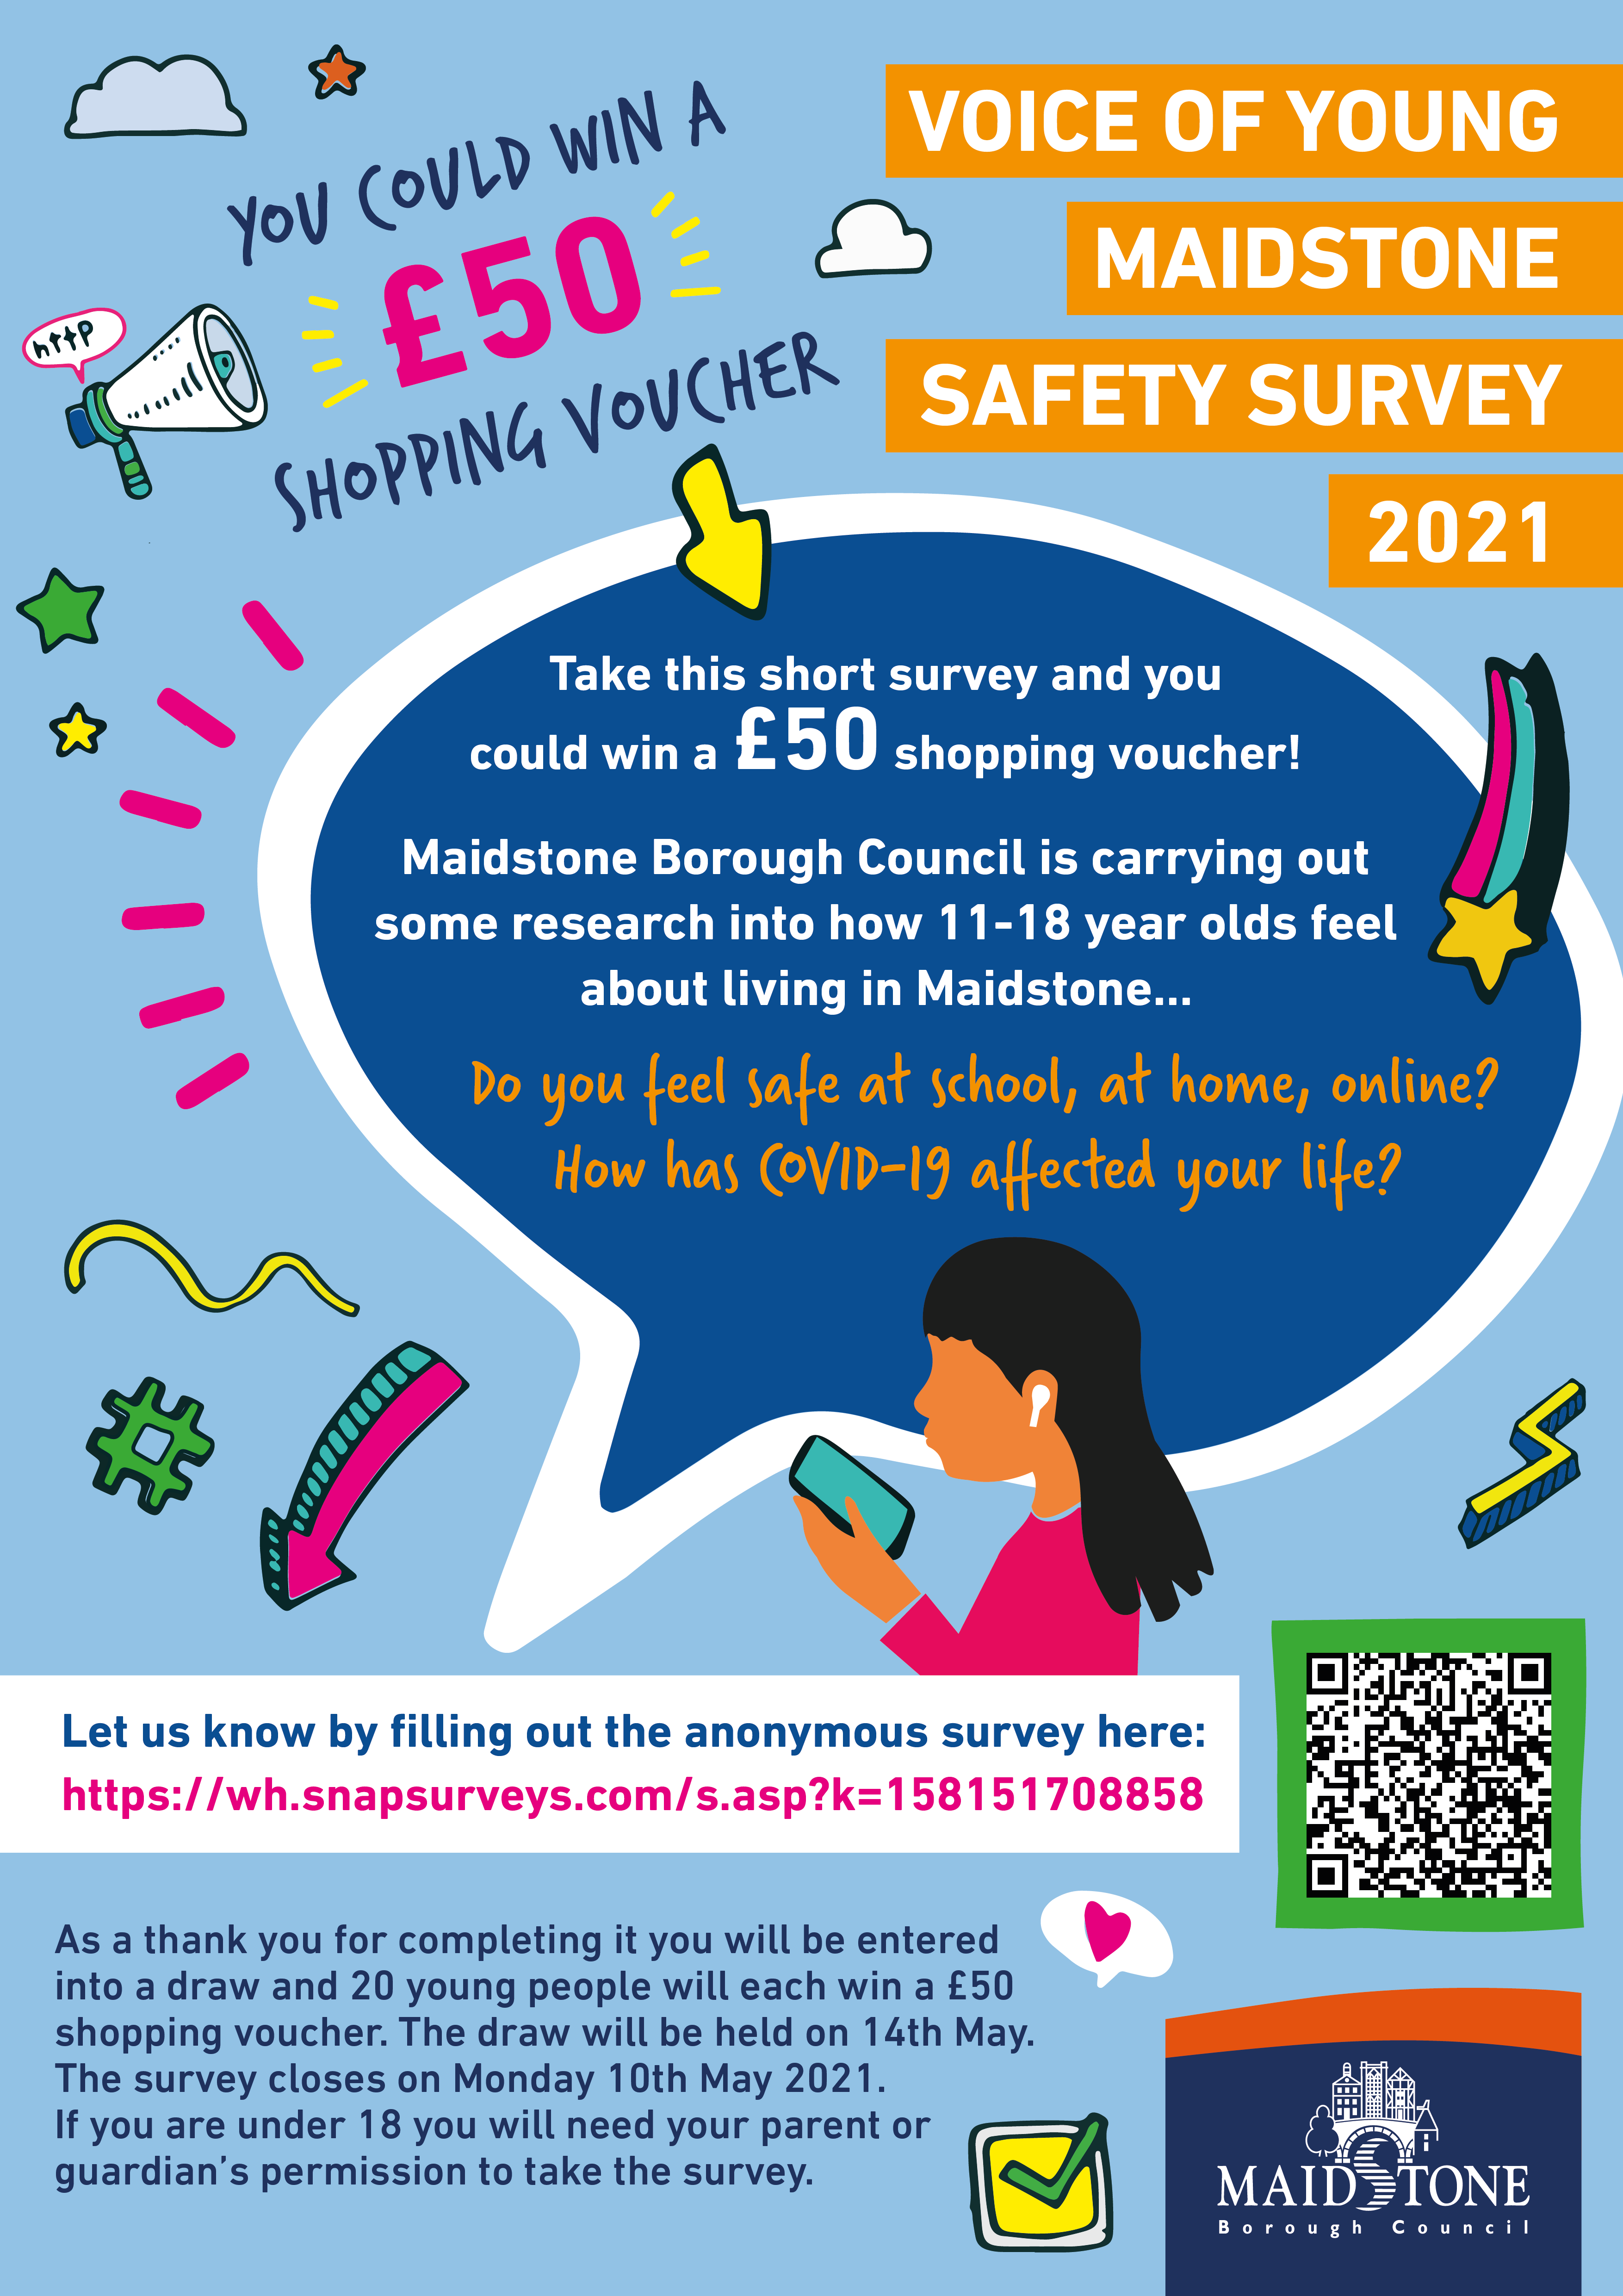 Voice of Young Maidstone safety survey image